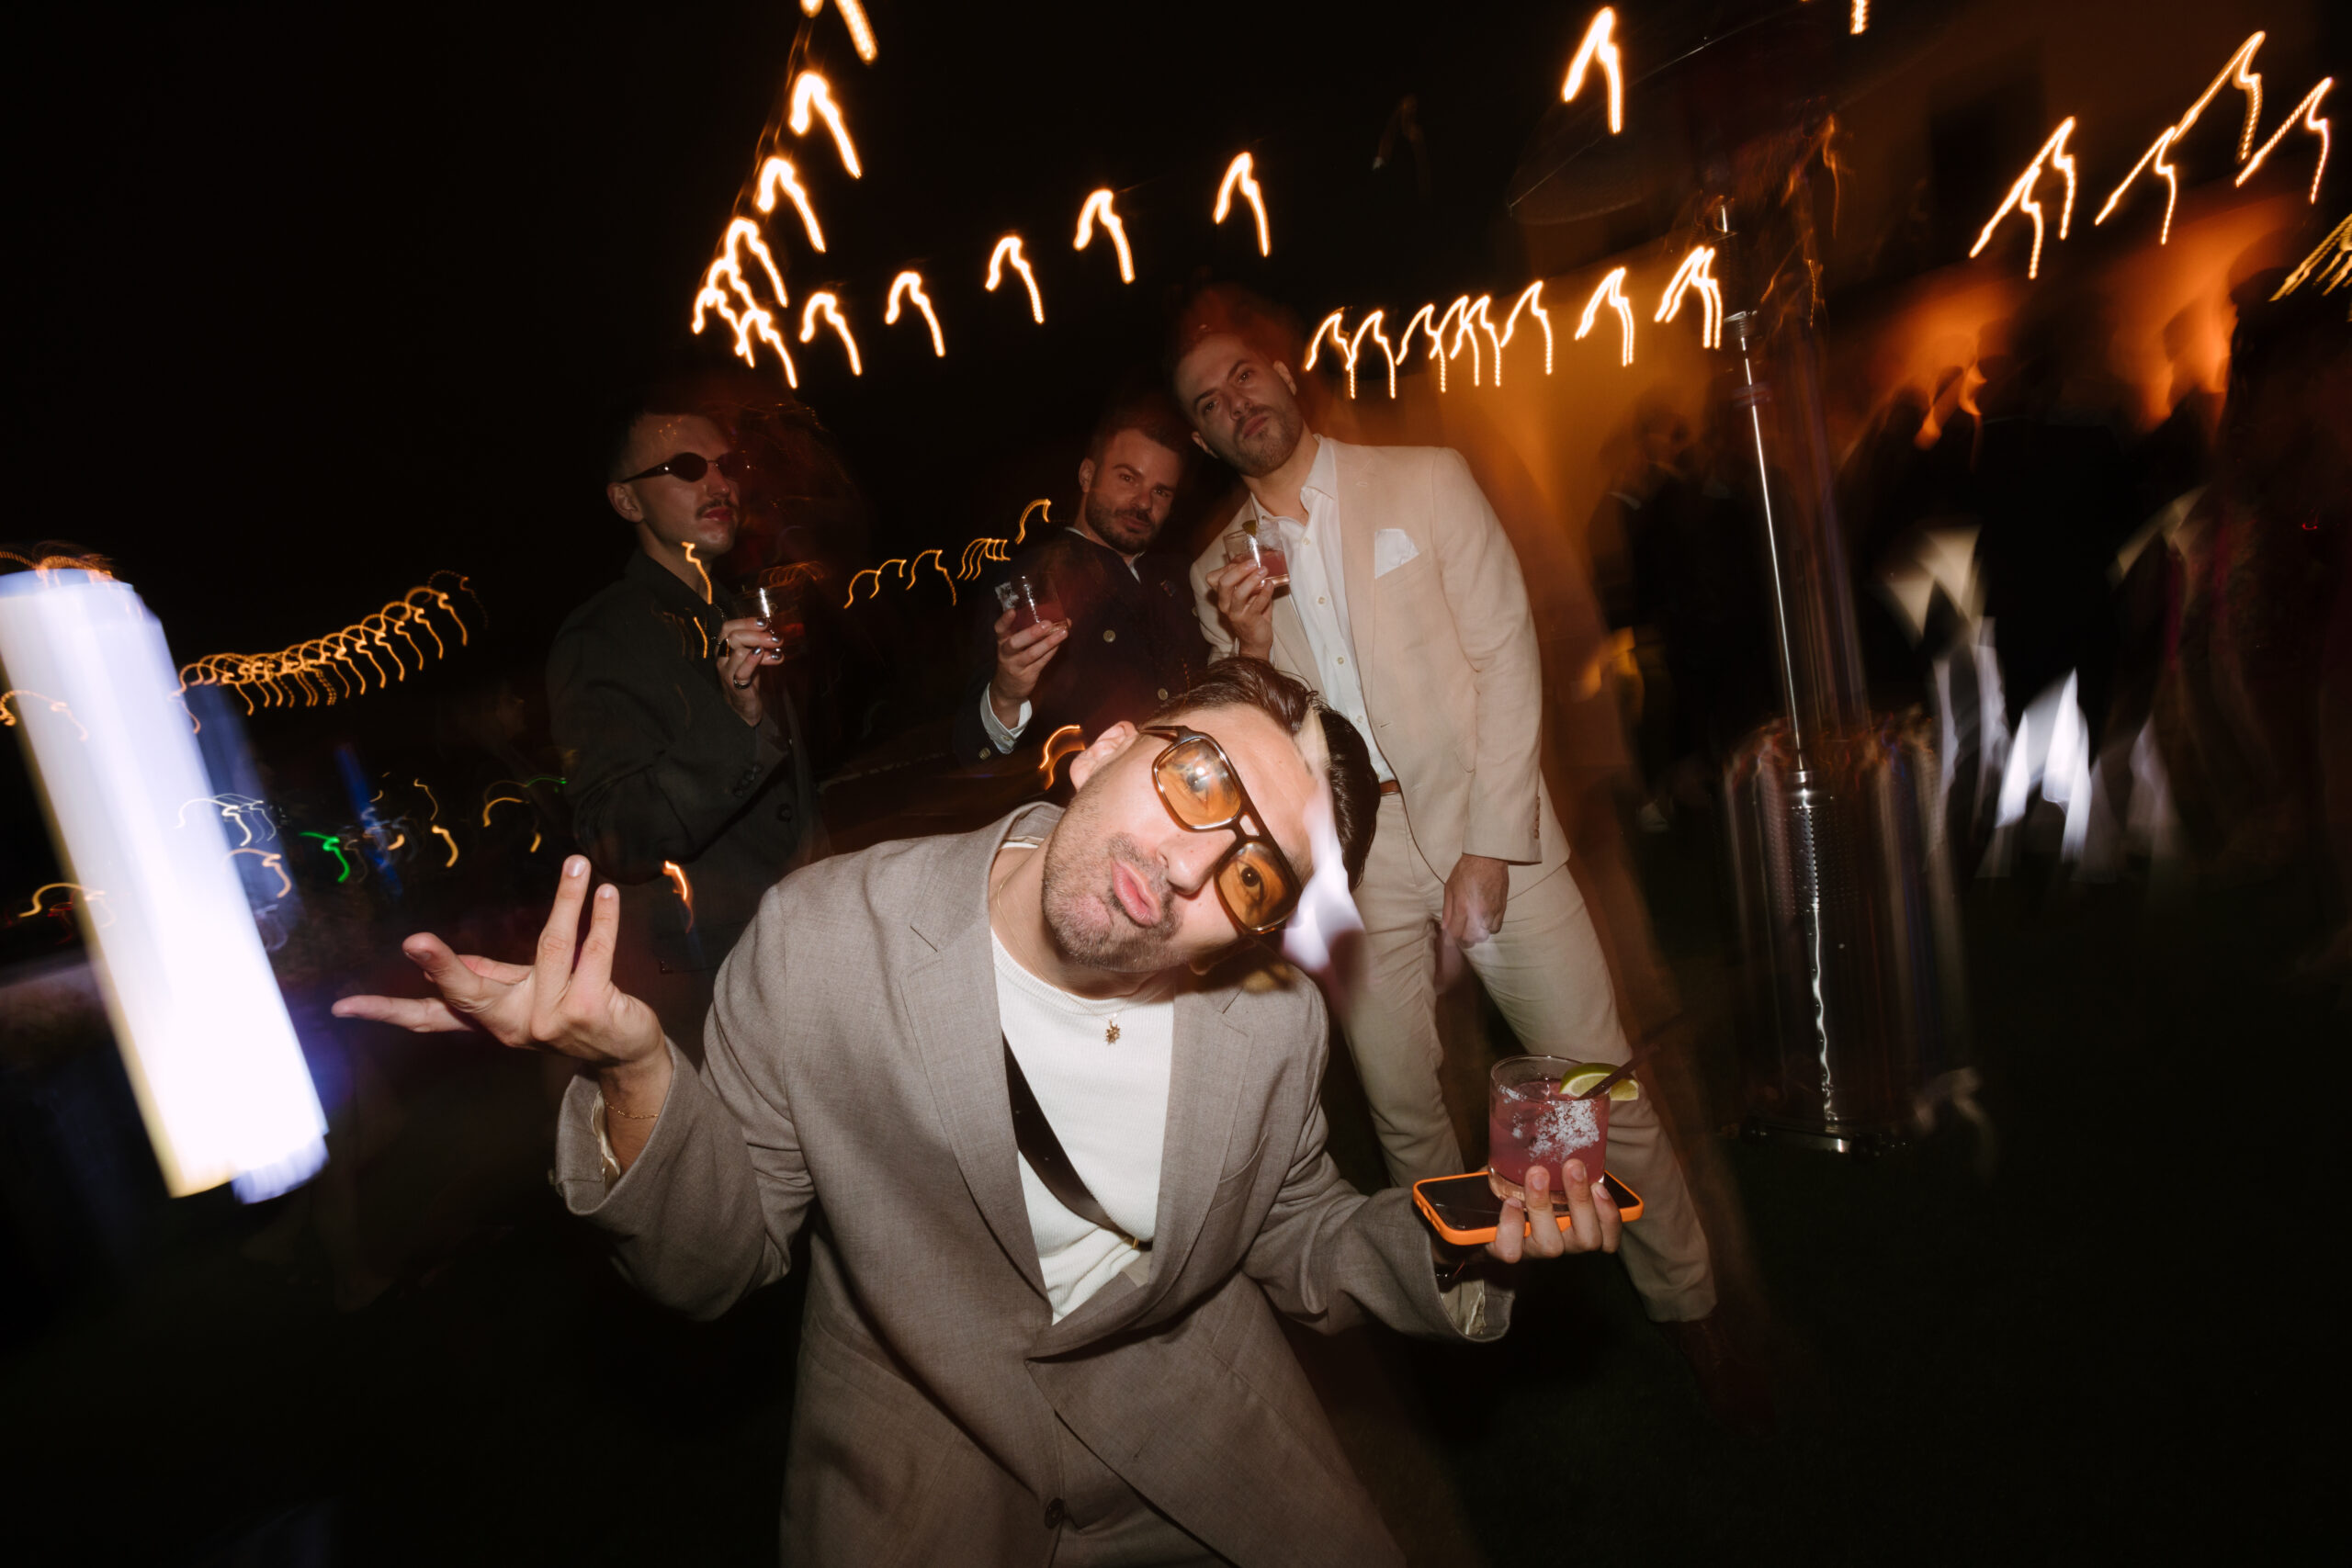 shutter drag flash photo of wedding guest dancing with a cocktail and phone in his hand